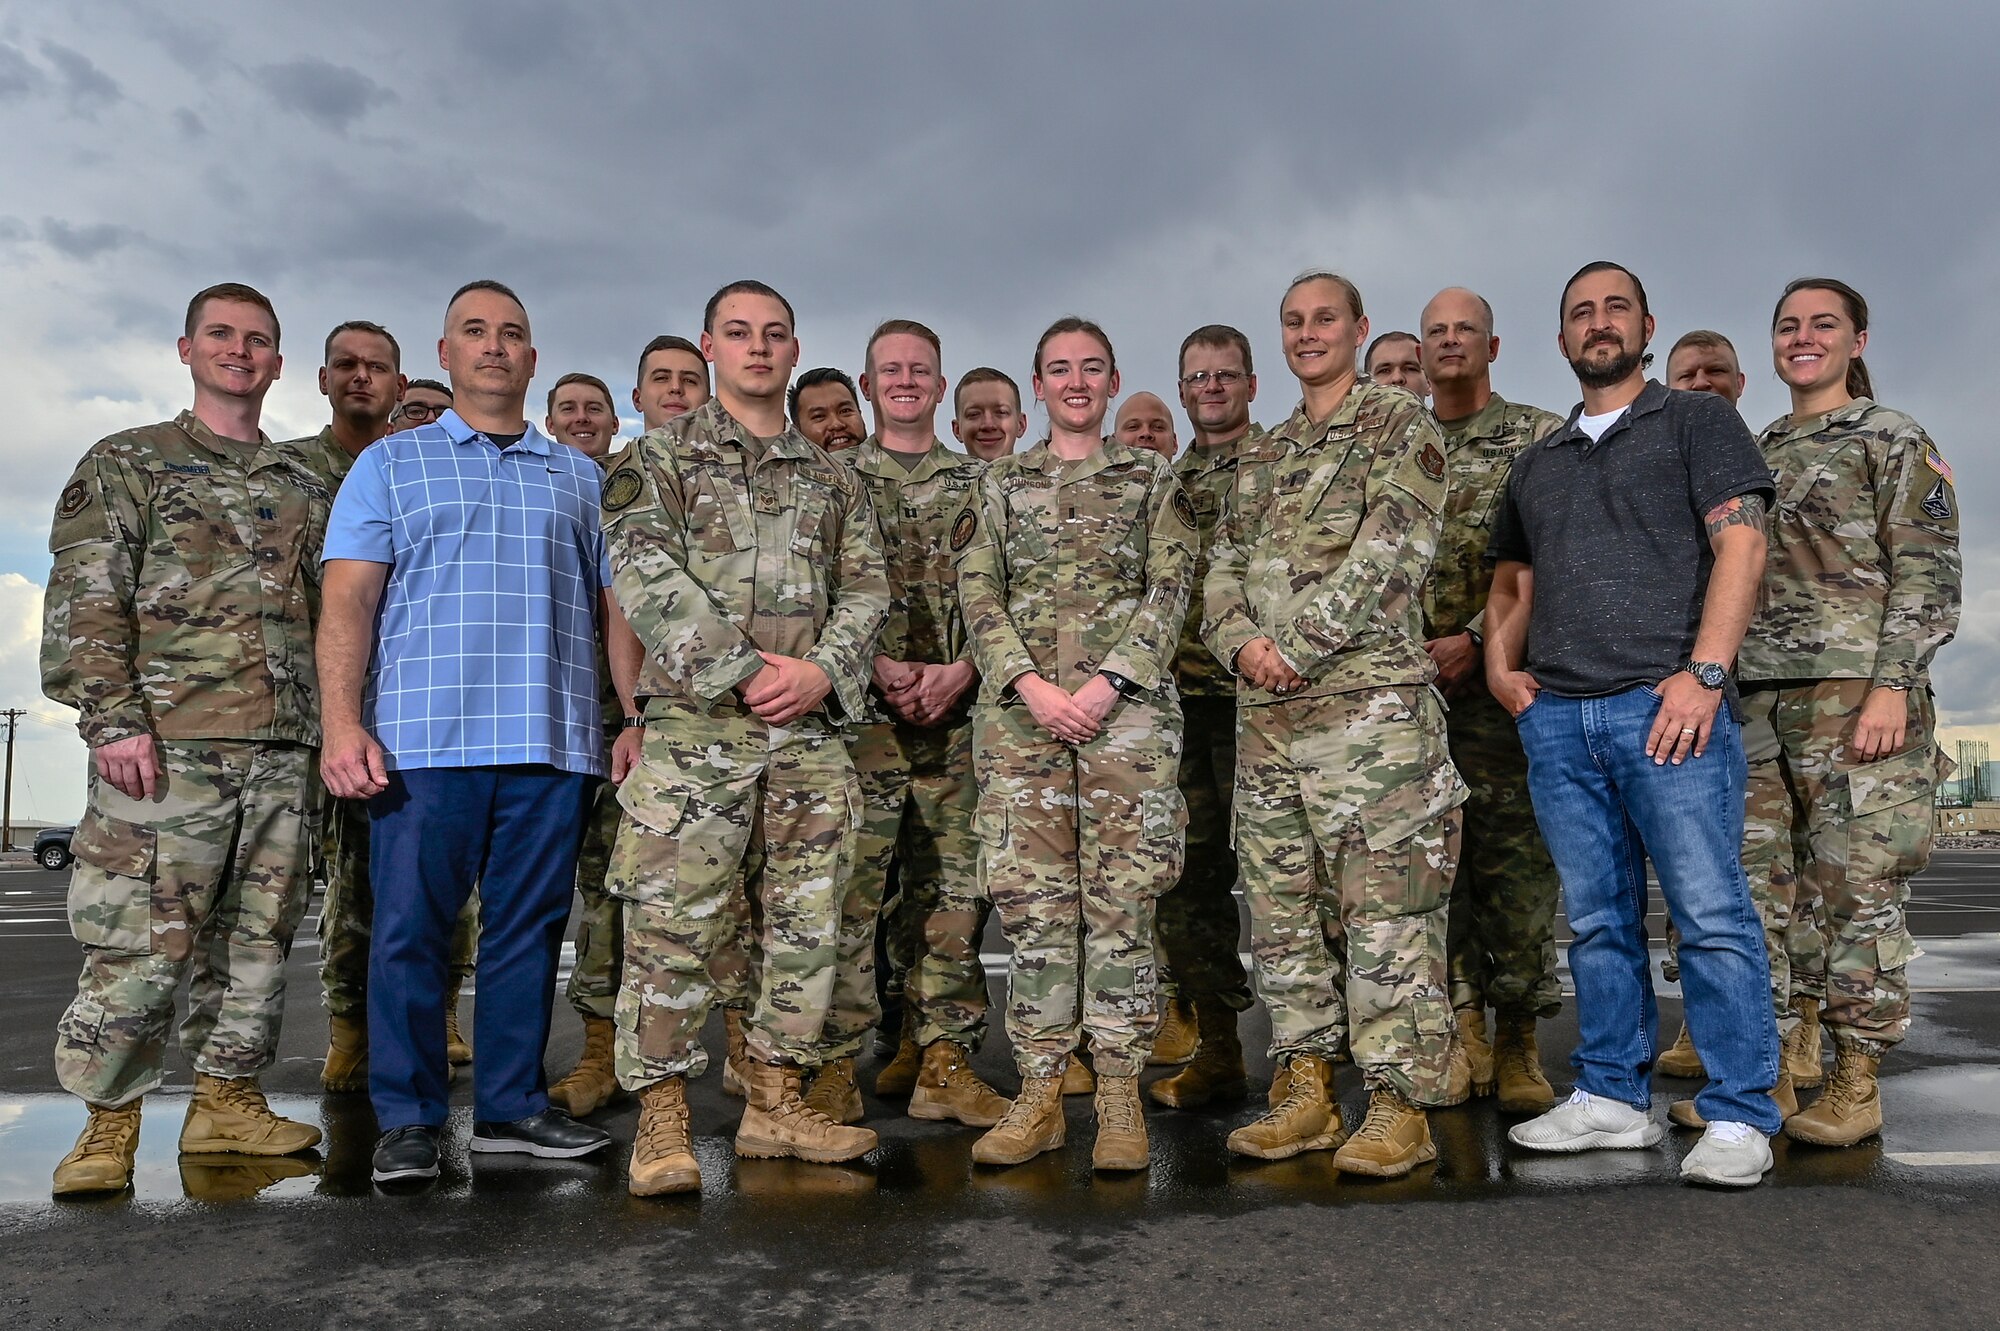 A group photo of civilian and military members